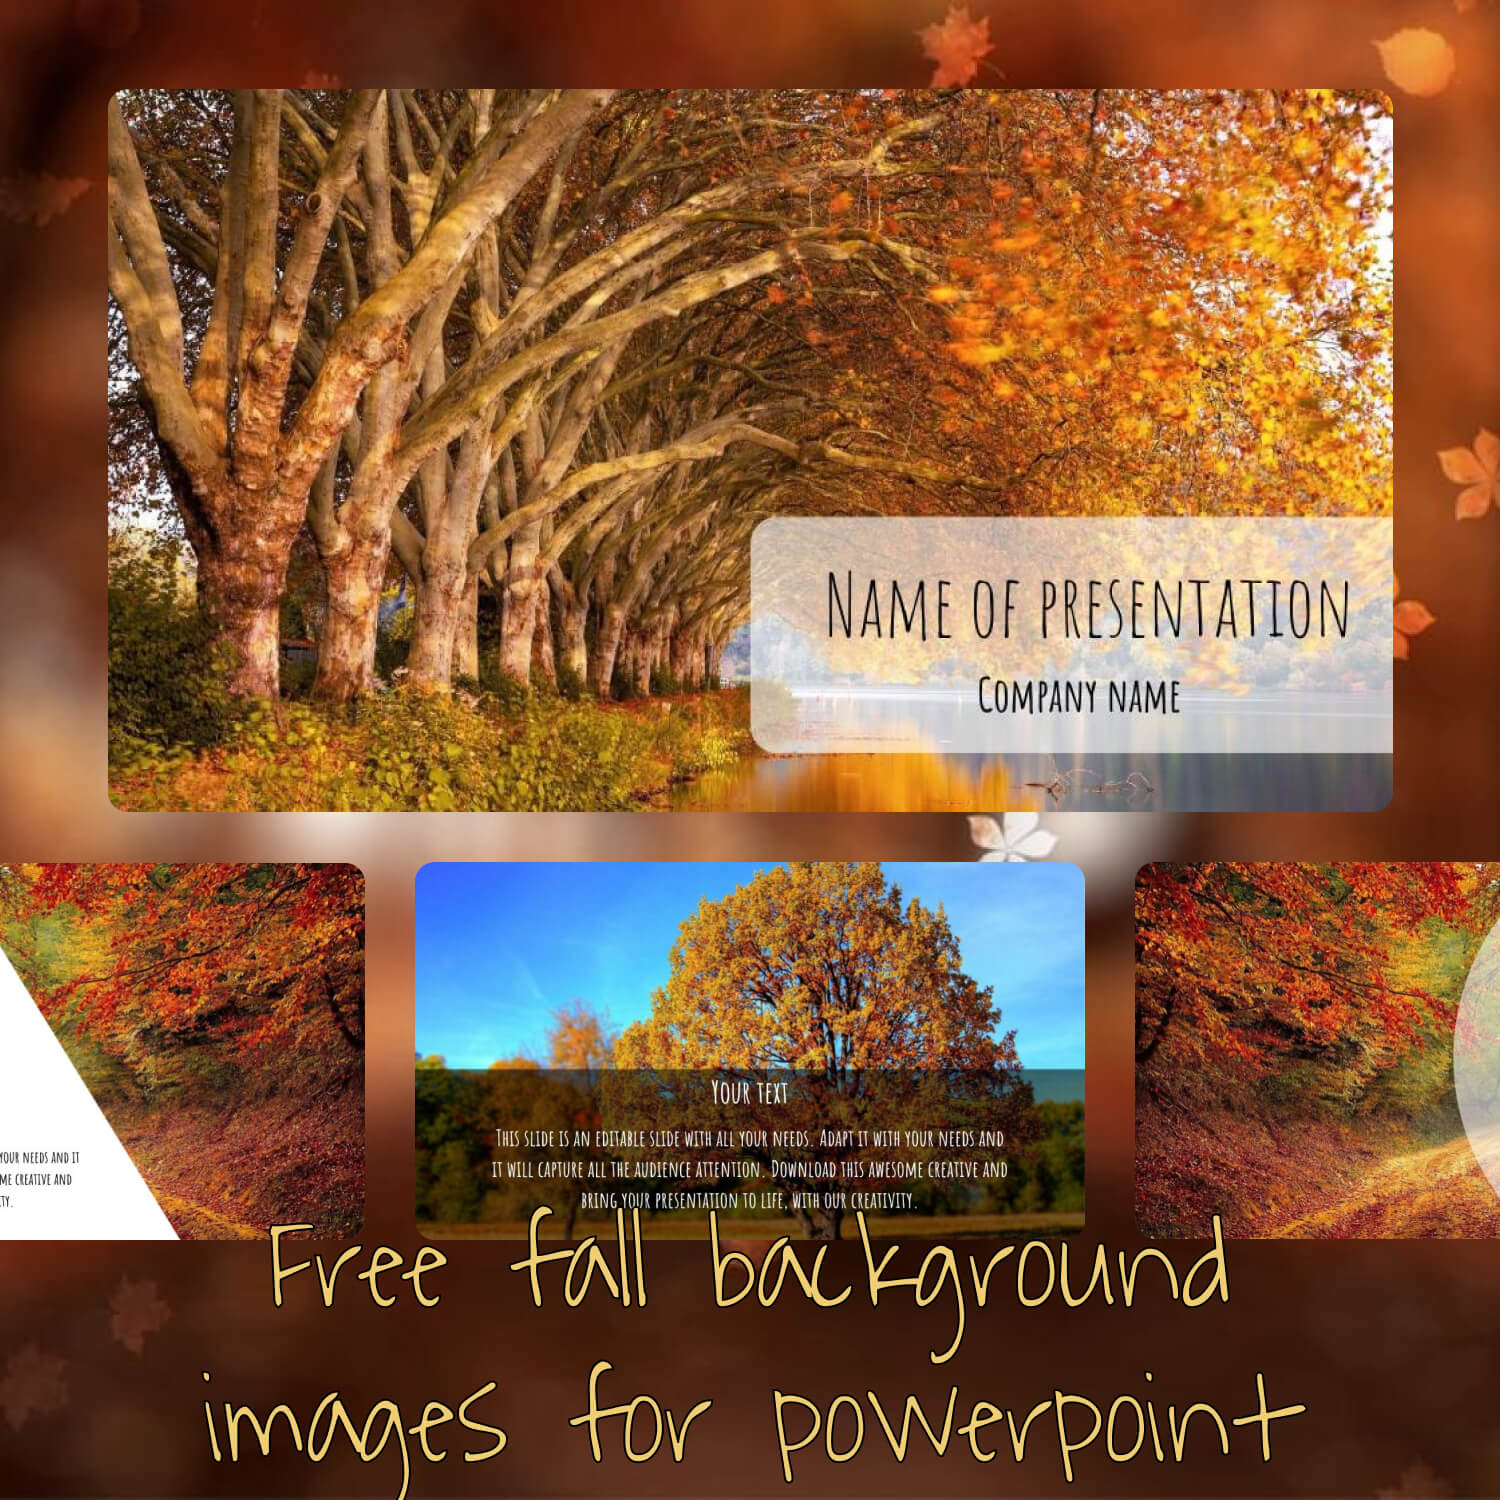 Free Fall Background Images For Powerpoint.